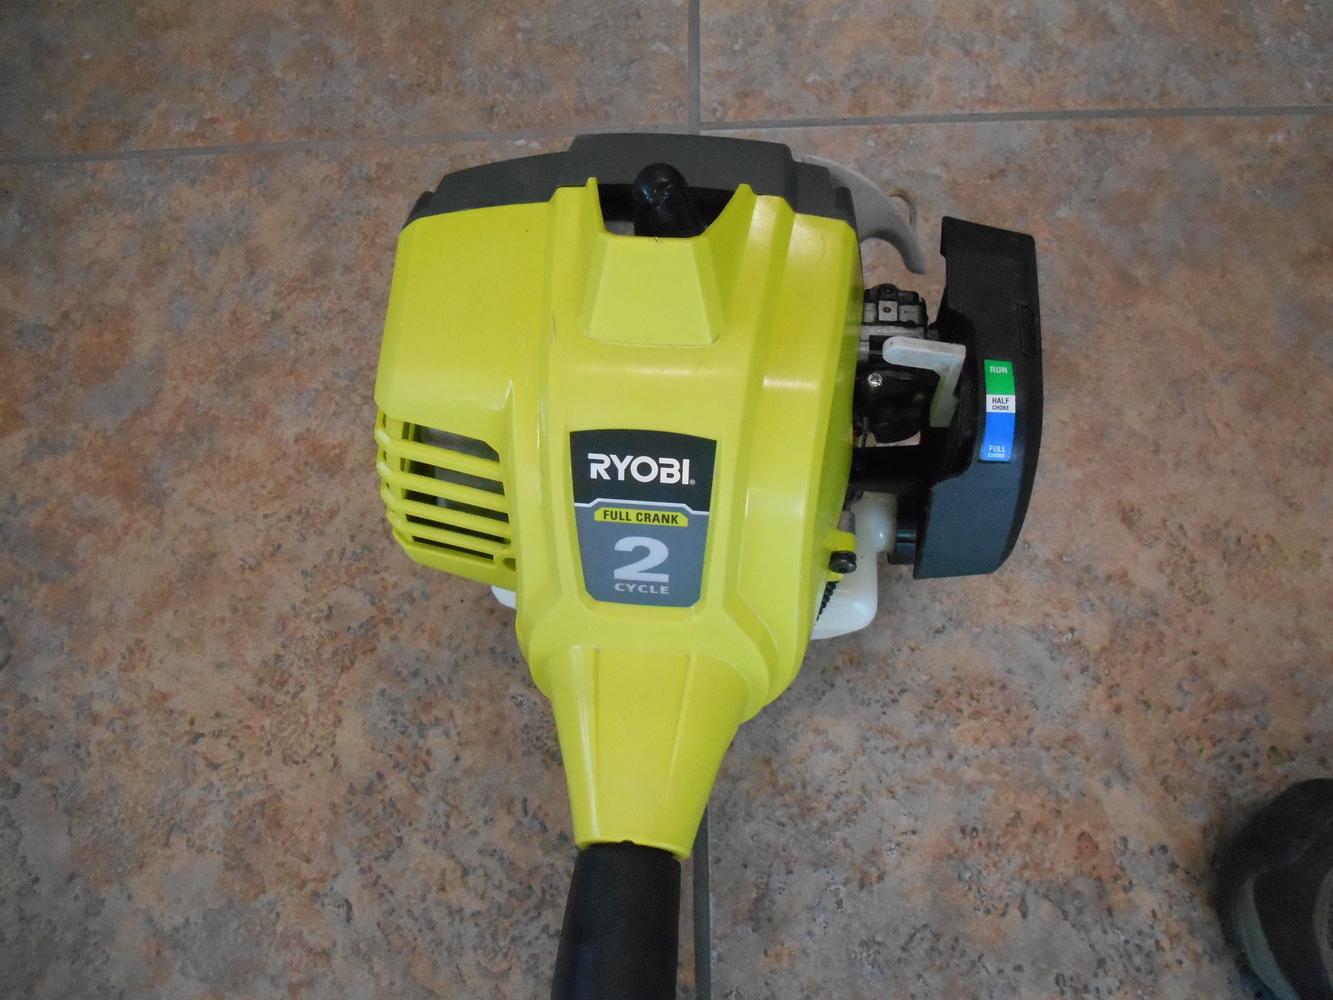 RYOBI 25 cc 2-Stroke Attachment Capable Full Crank Curved Shaft String Trimmer